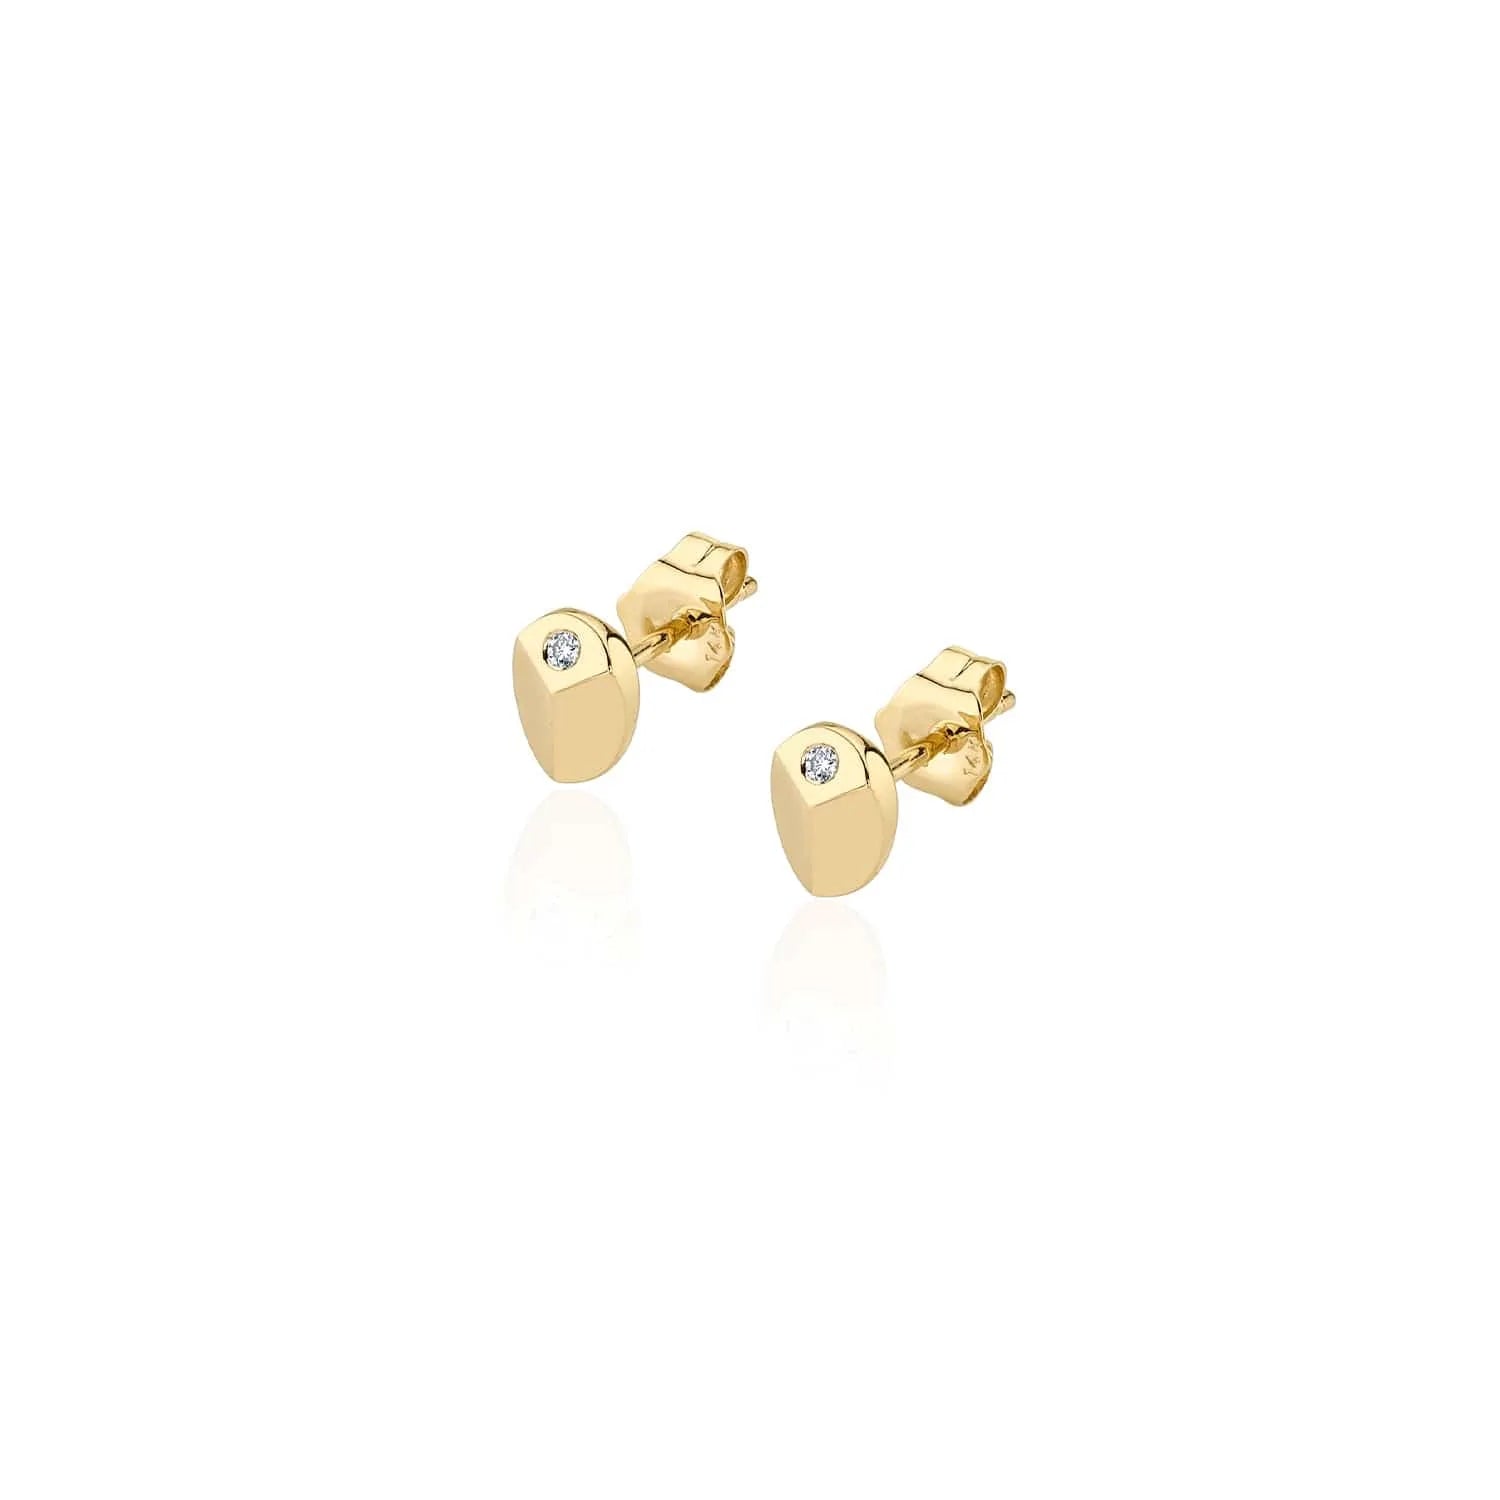 MICHAEL M Earrings 14K Yellow Gold Carve Stud with Diamonds ER451YG